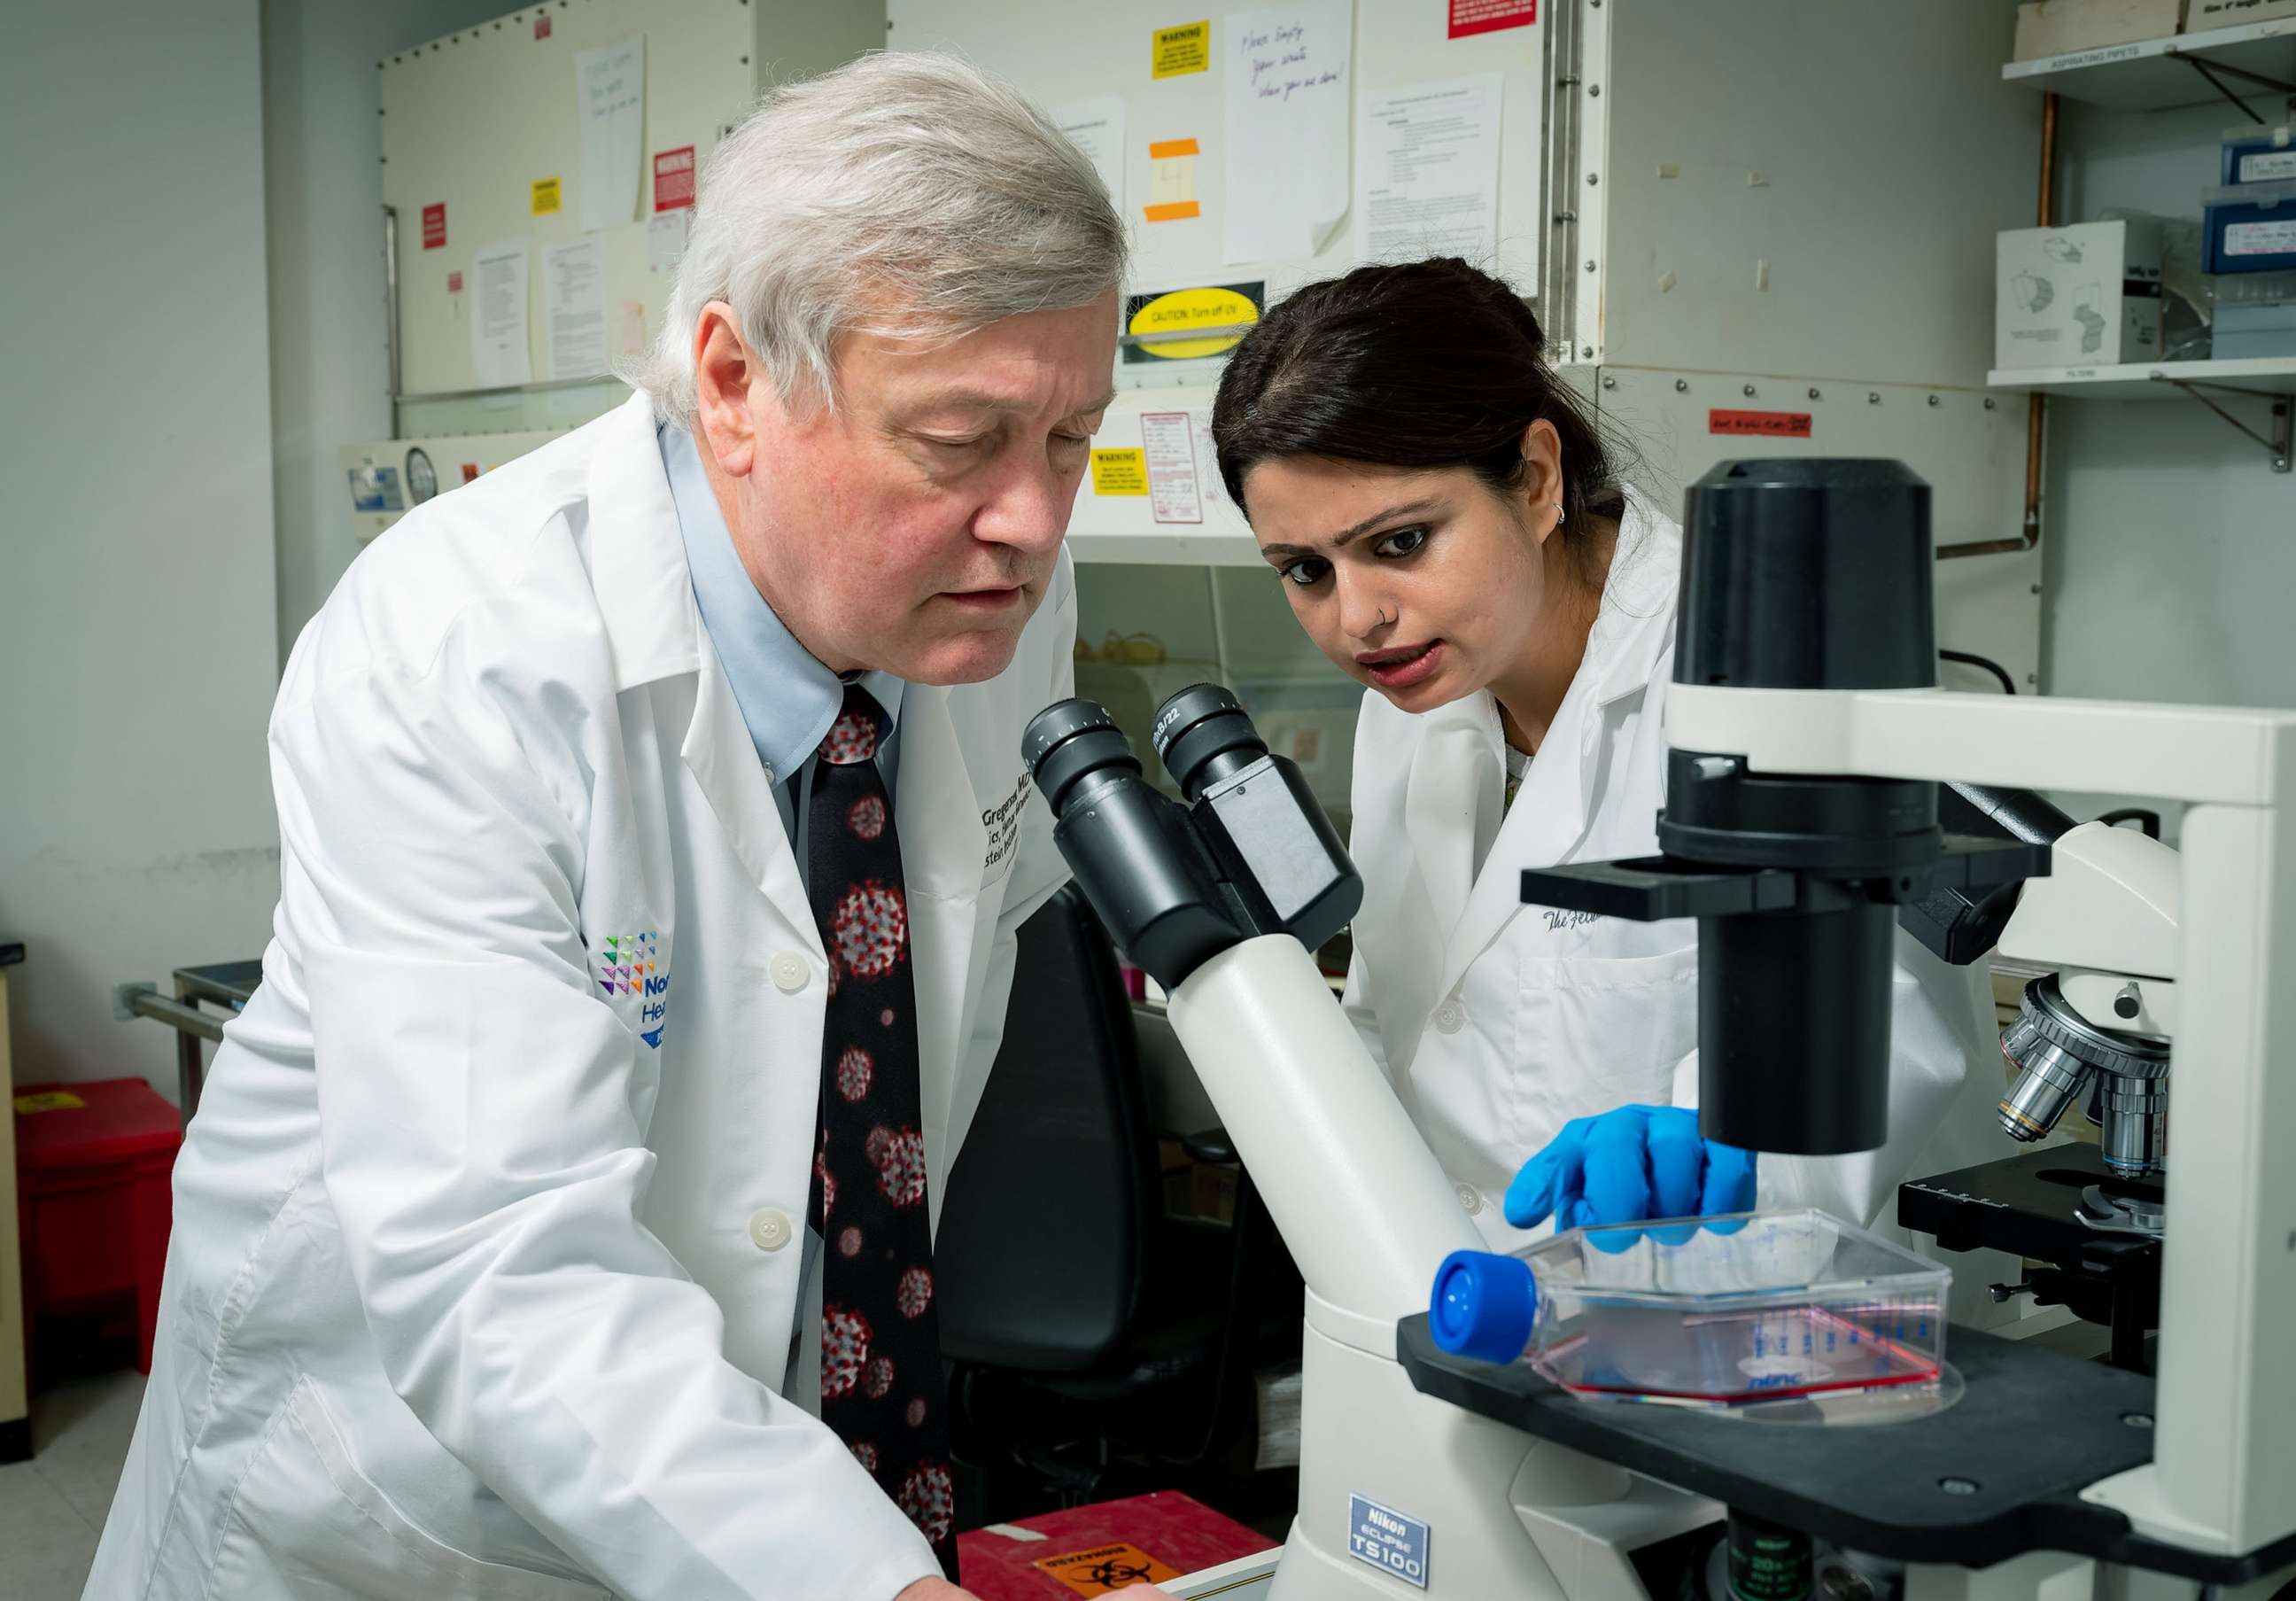 PHOTO: Dr. Peter Gregersen studies a lab specimen in the ROSE Study at Feinstein Institutes for Medical Research.